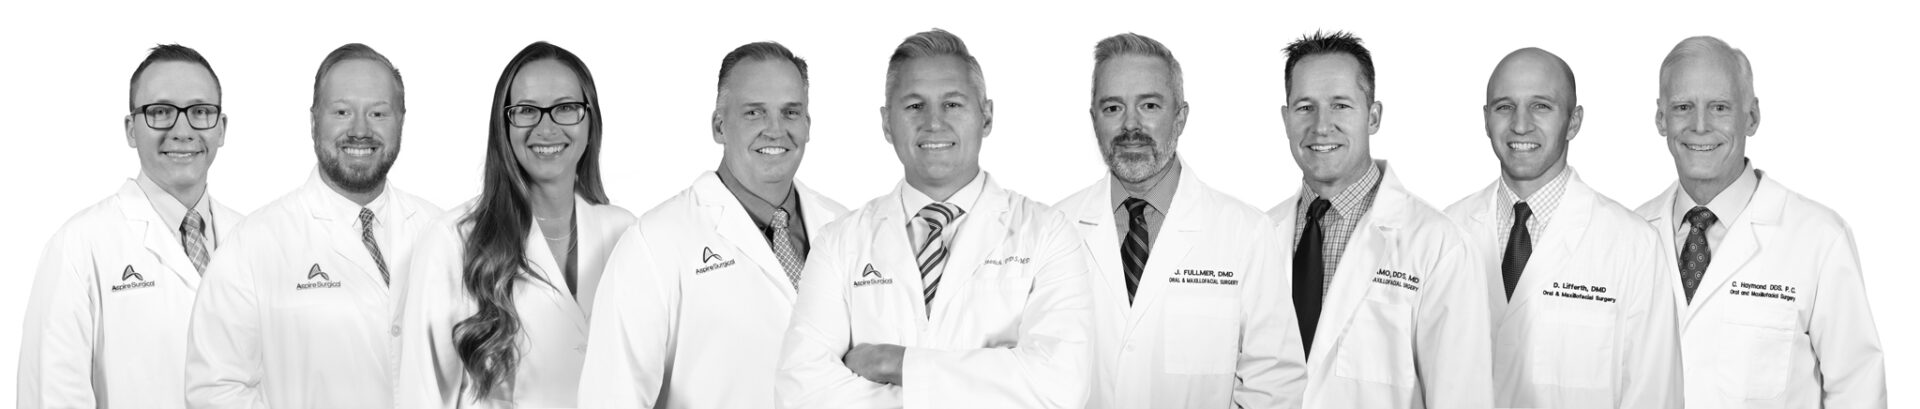 Aspire's Board Certified Oral Surgeons serving Salt Lake City, Utah. Best Oral Surgeons for Dental Implants, Wisdom Teeth Removal, Dentures, and Oral Cosmetic Surgery.